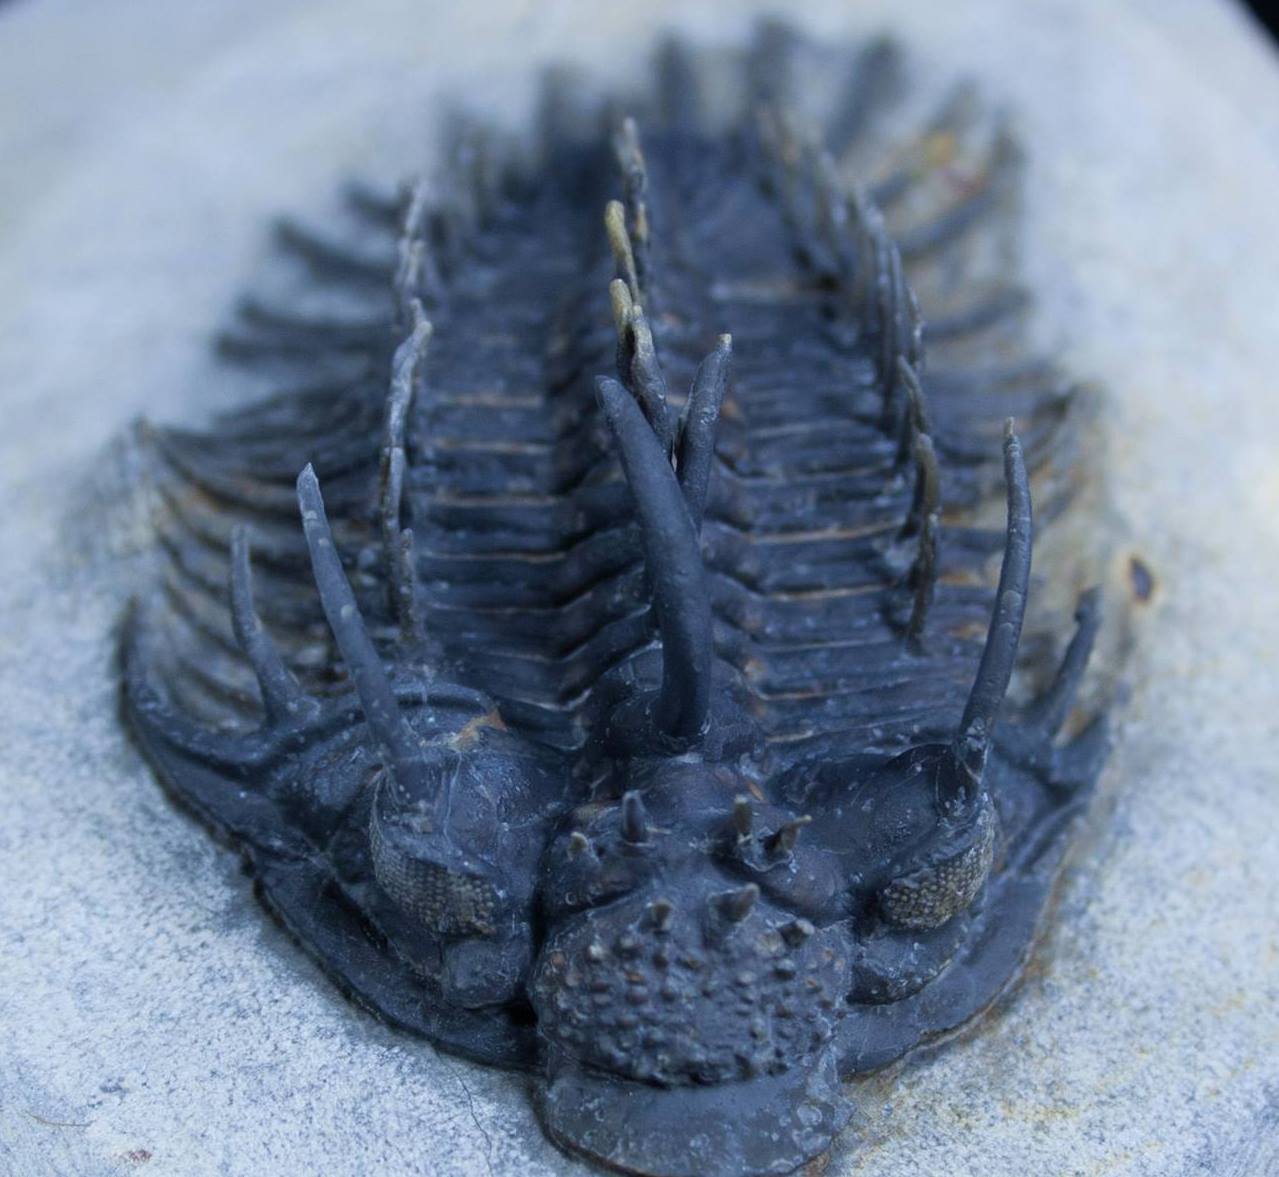 A spiny Comura trilobite from Morocco.  This 350 million year old trilobite shows amazing detail including over 40 free standing spines and eye facets thanks to being encased in hard limestone.  It was found when the limestone was broken and a cross section of the trilobite could be seen.  It then had to be meticulously prepared from the surrounding rock under microscope.  Truly a stunning specimen.

Trilobites are an extinct type of marine arthropod that had a hard exoskeleton.  They were one of the dominant life forms in our oceans for 270 million years before going extinct along with 90% of all life during the Permian mass extinction.  Owing to their hard shell they are often exquisitely preserved in limestones and shale.
Photo from Fossil Era